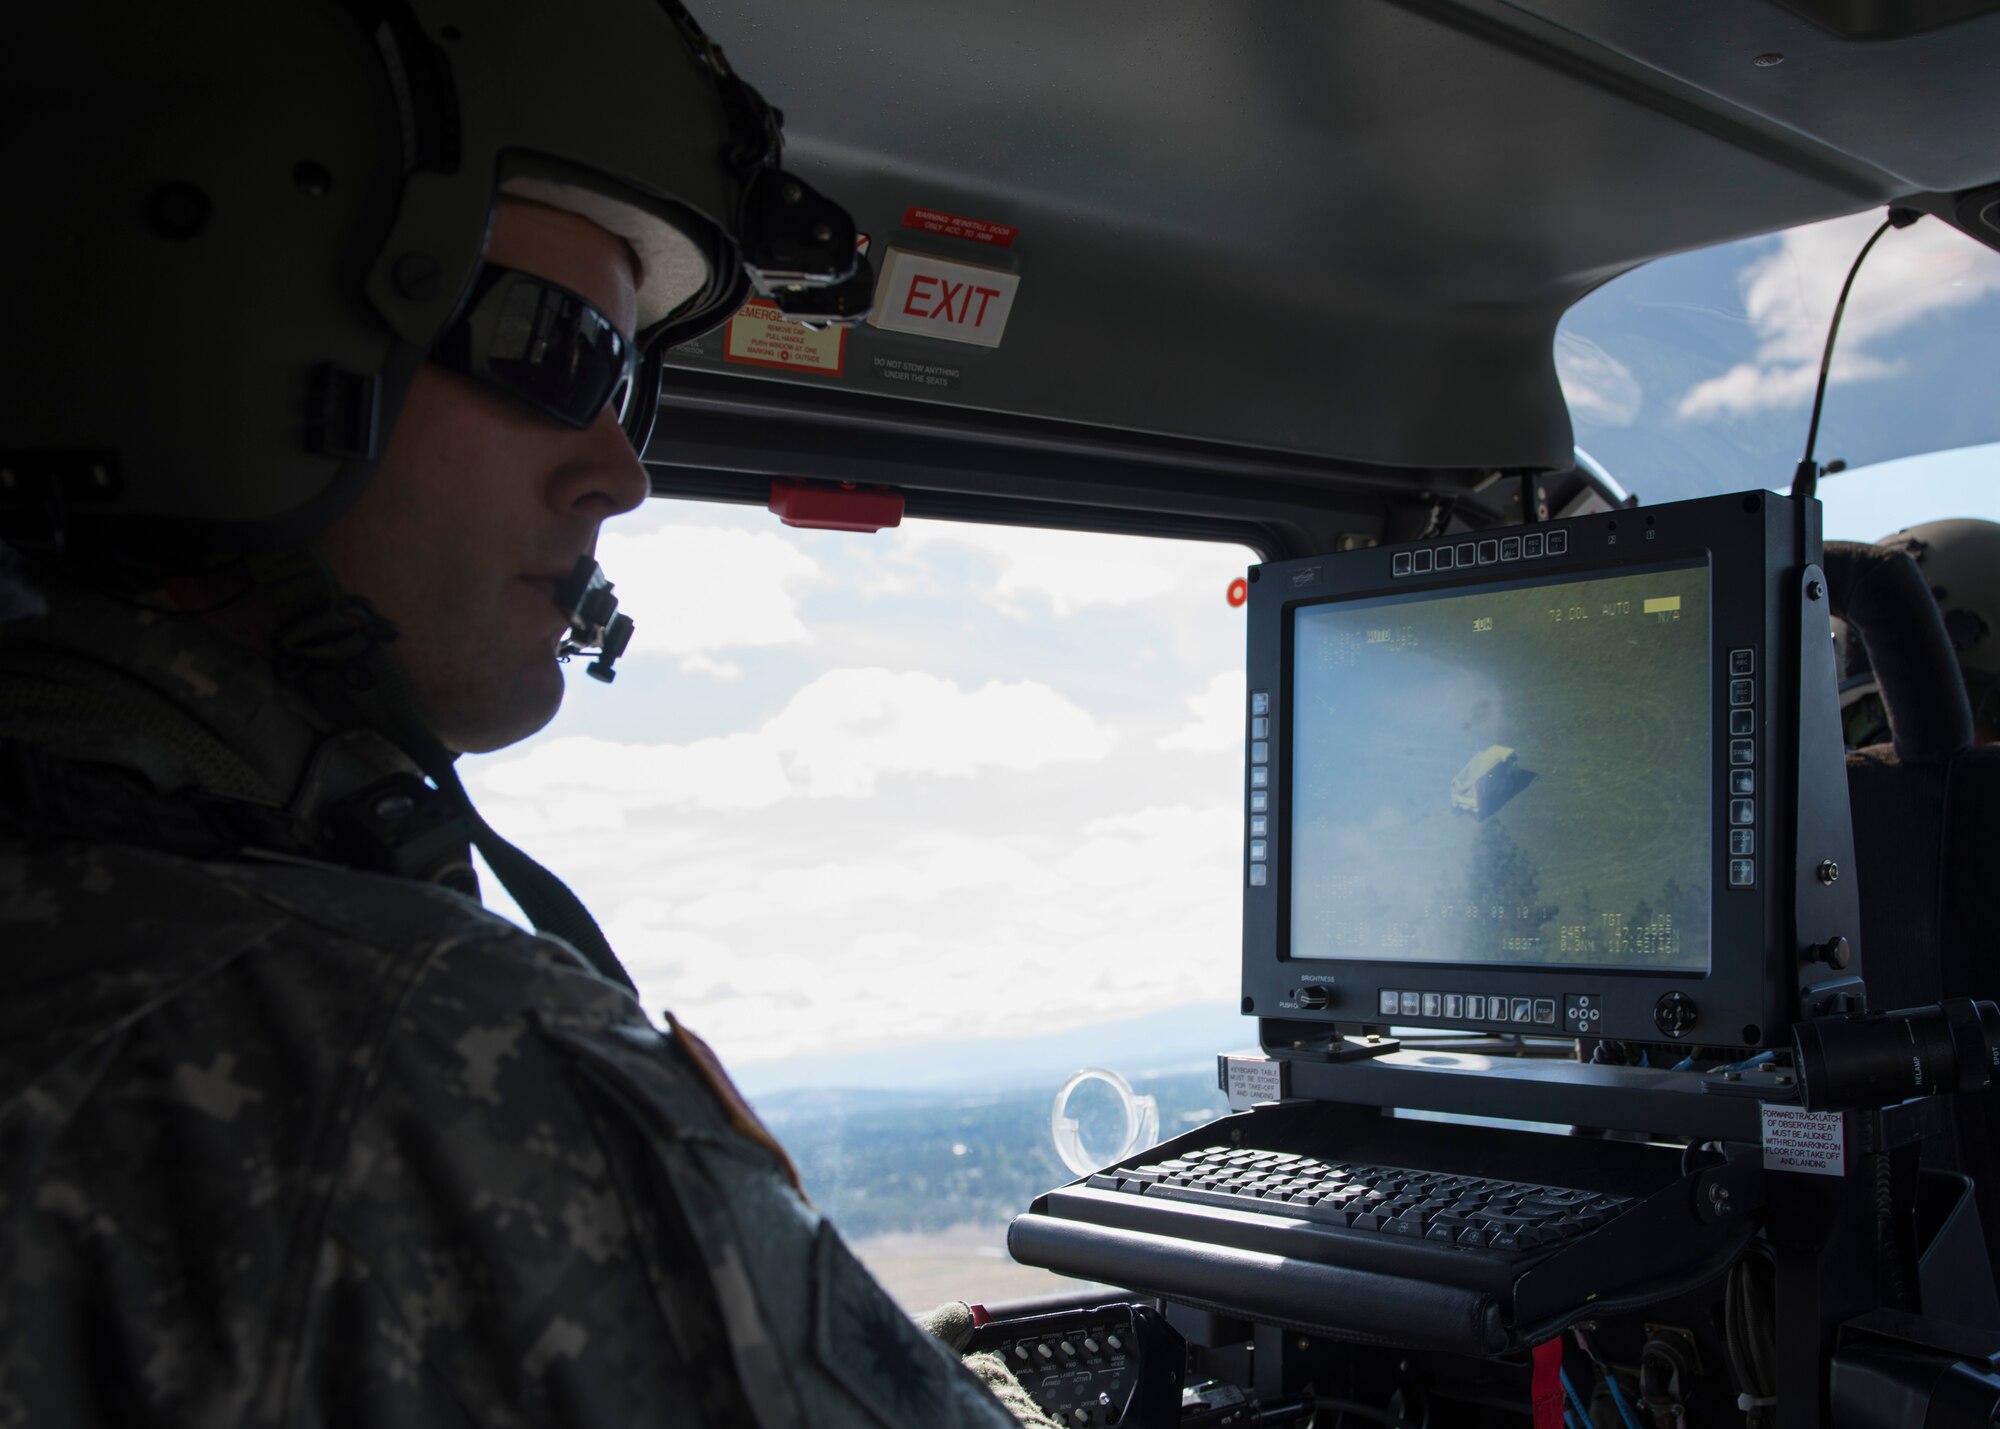 Sgt. Darrell Russell, C Company, 1st Battalion, 112th Airborne Regiment Lakota crew chief, spots a disabled truck using the on-board camera system June 14, 2017, north of Fairchild Air Force Base, Washington. The Lakota is equipped with a nose mounted camera system that gives the light aircraft the ability to spot and lock onto targets from long distances.
(U.S. Air Force photo / Airman 1st Class Ryan Lackey)